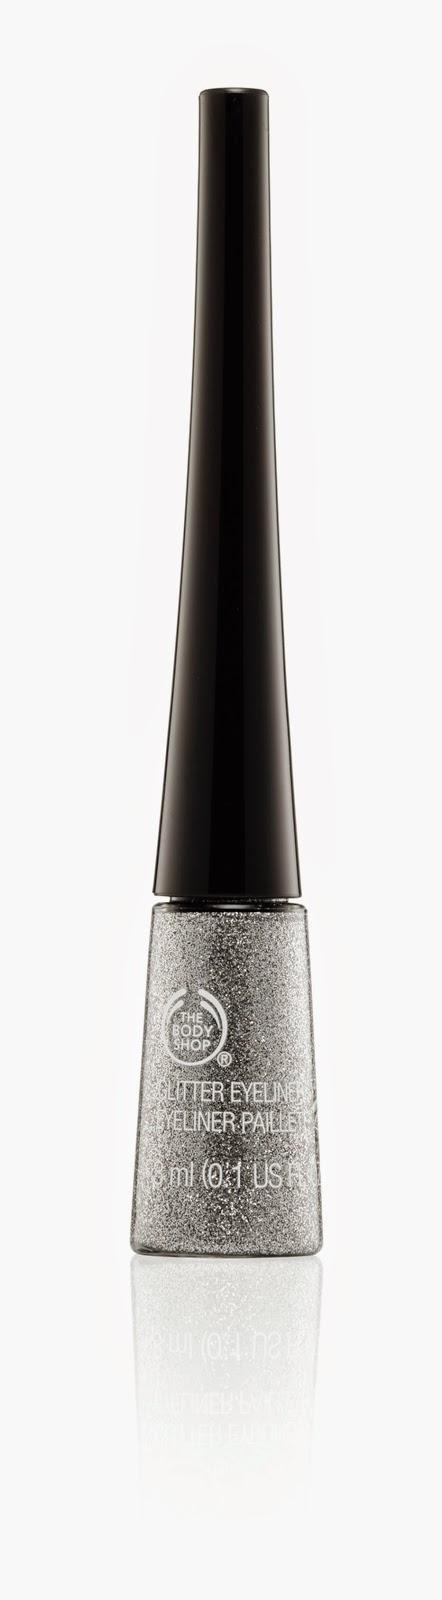 Must-Have Products This Christmas By The Body Shop - Liquid Eyeliner